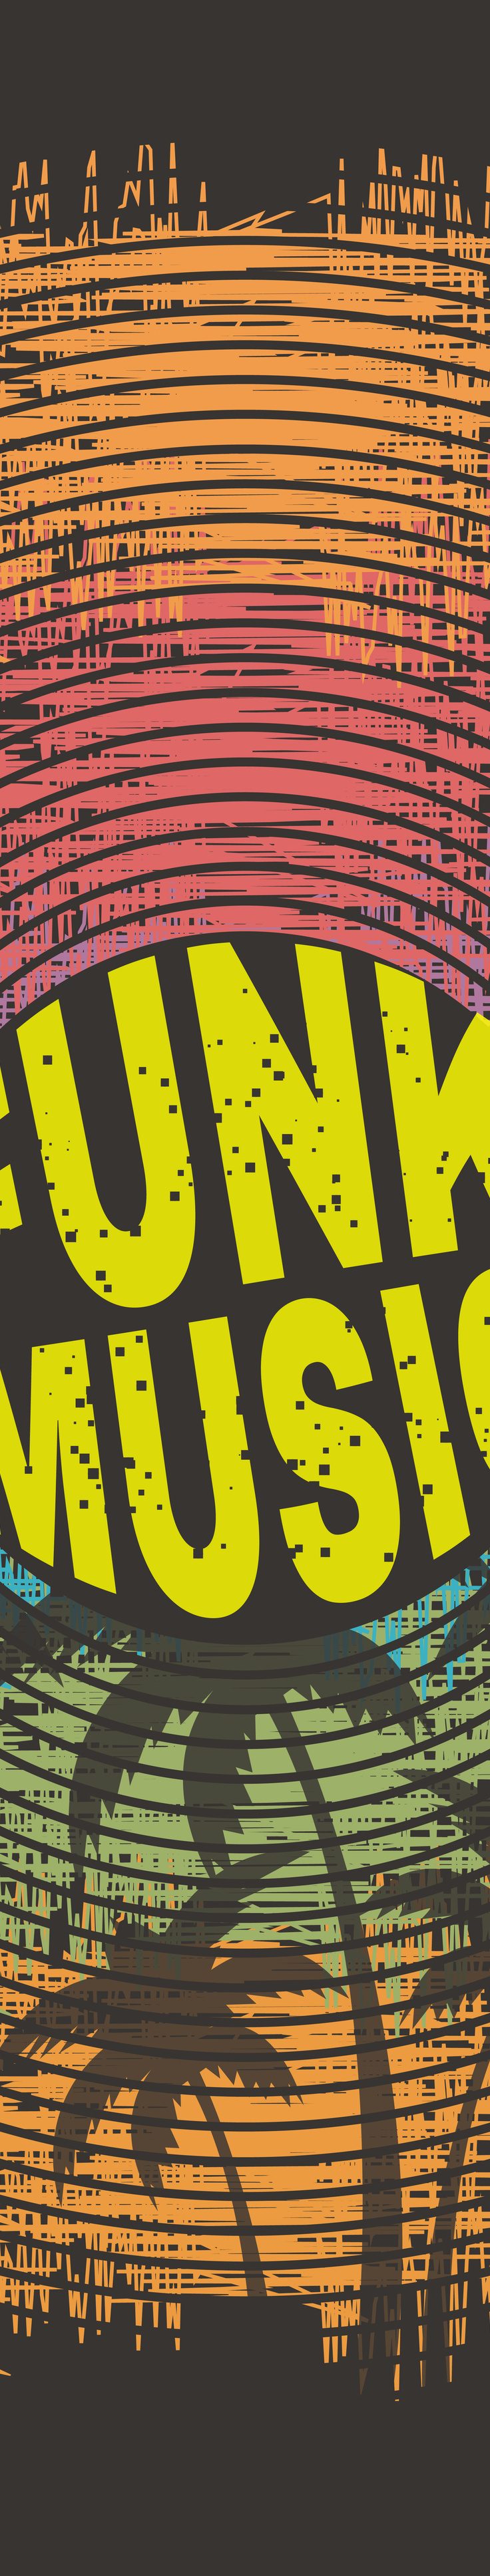 “Word Up”: Funk and R&B Bands and Cultural Politics of the “Old School”